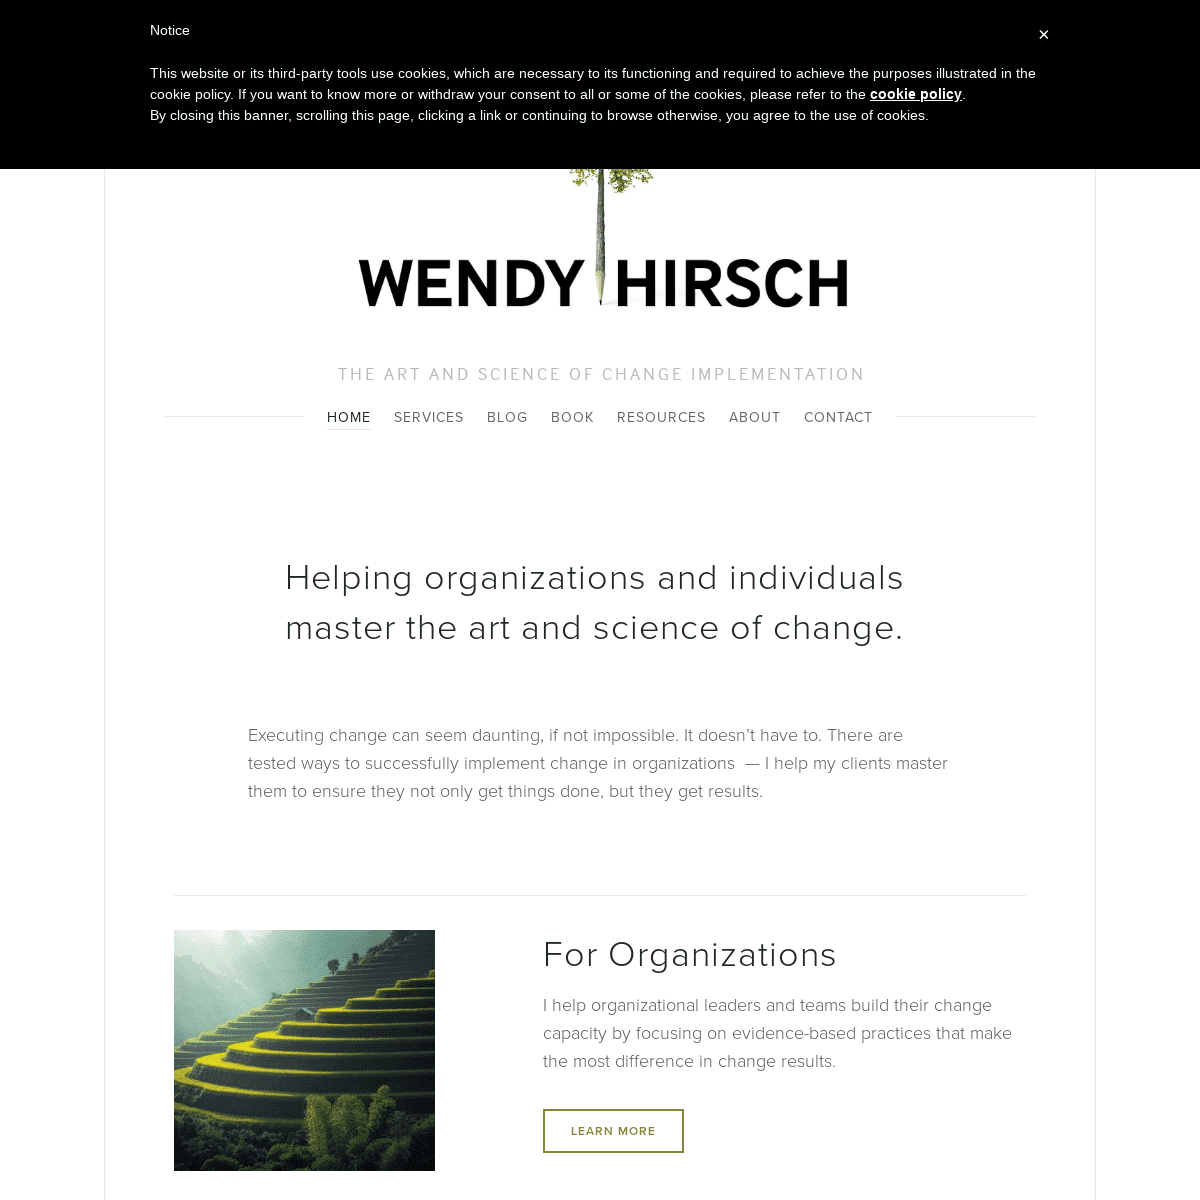 Change Implementation Consulting - WENDY HIRSCH CONSULTING